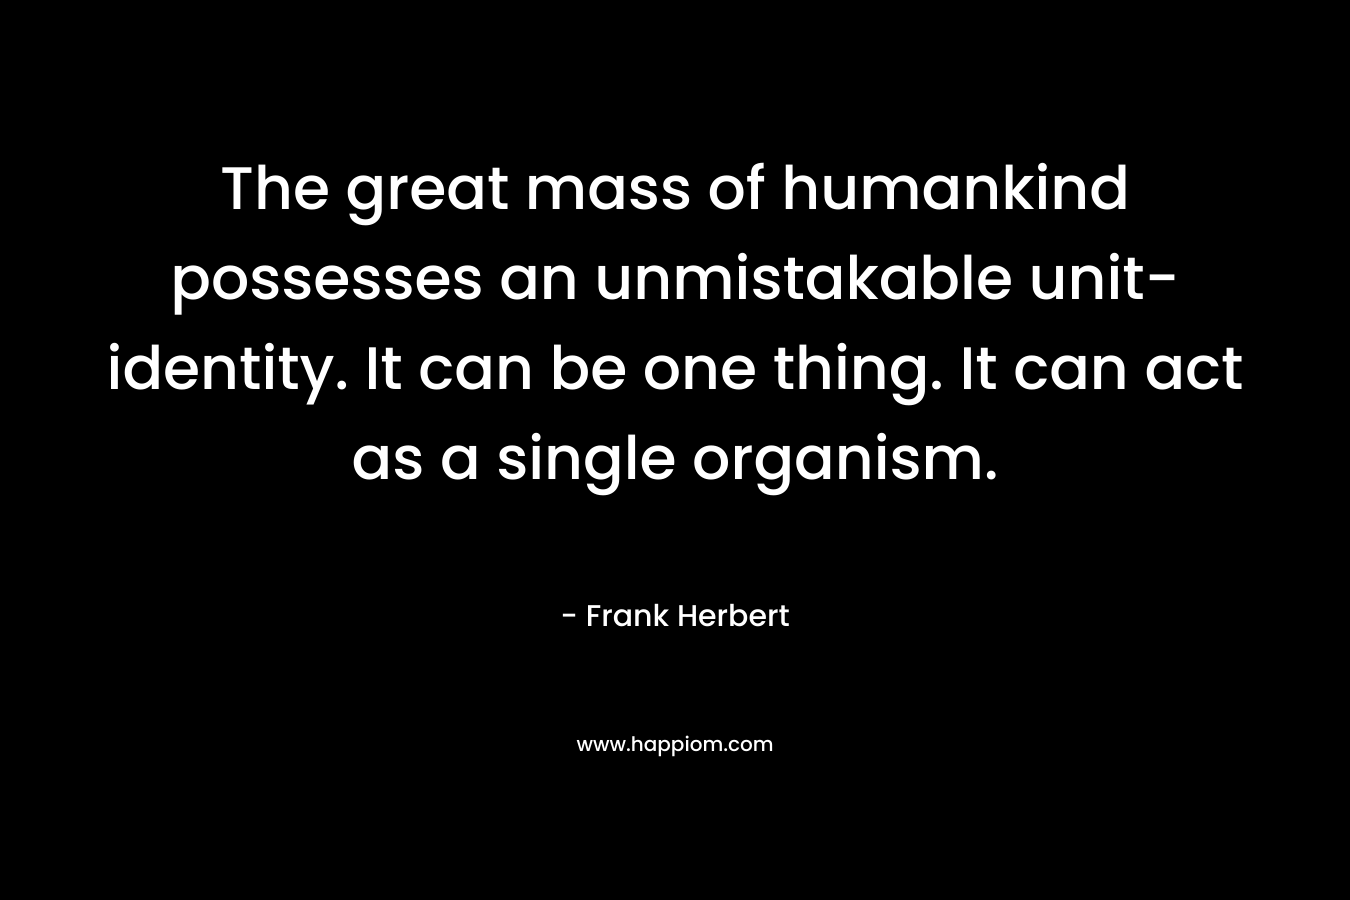 The great mass of humankind possesses an unmistakable unit-identity. It can be one thing. It can act as a single organism. – Frank Herbert